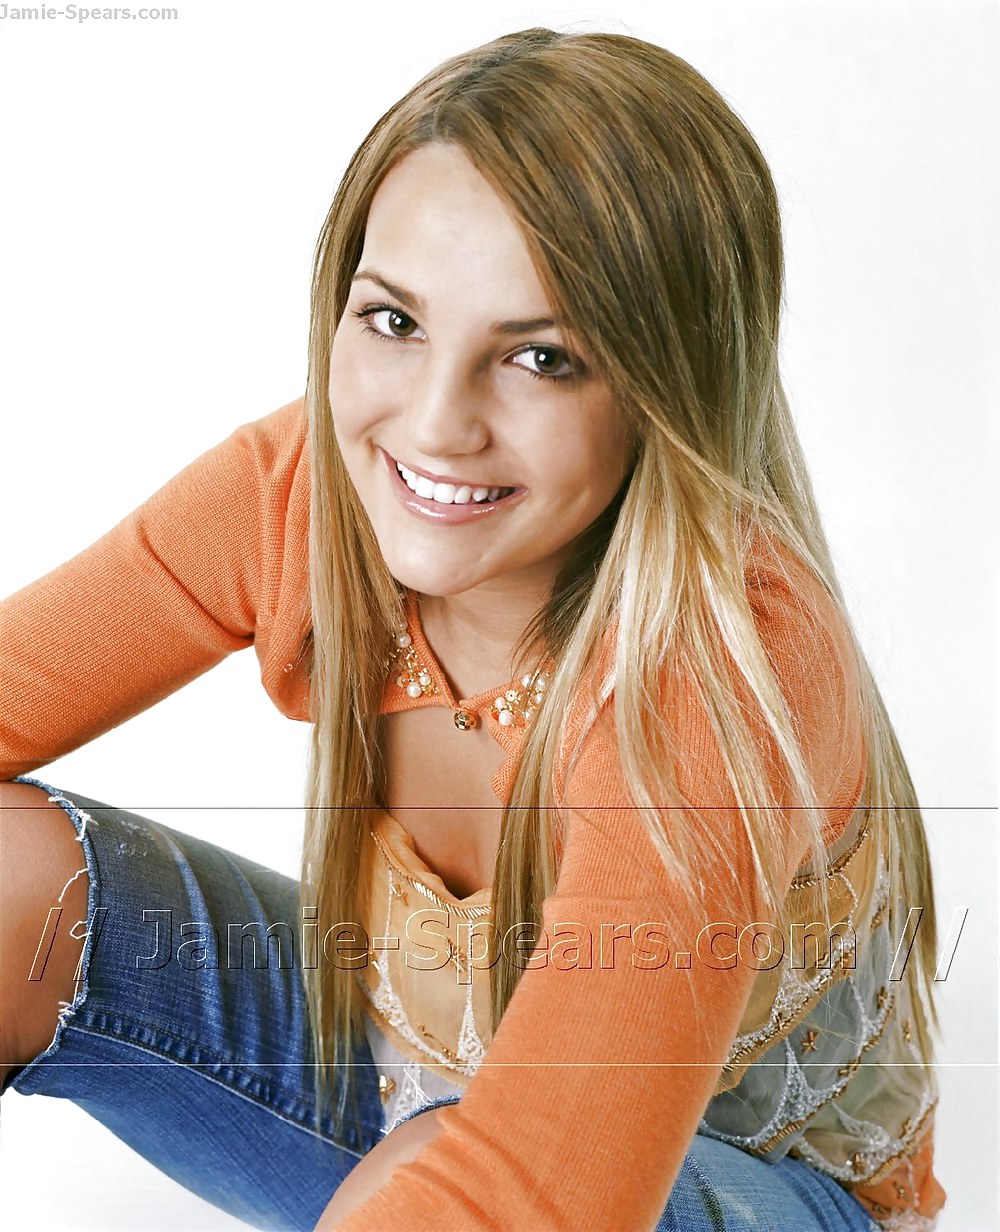 Jamie Lynn Spears Mix Des Images Fakes #22187527